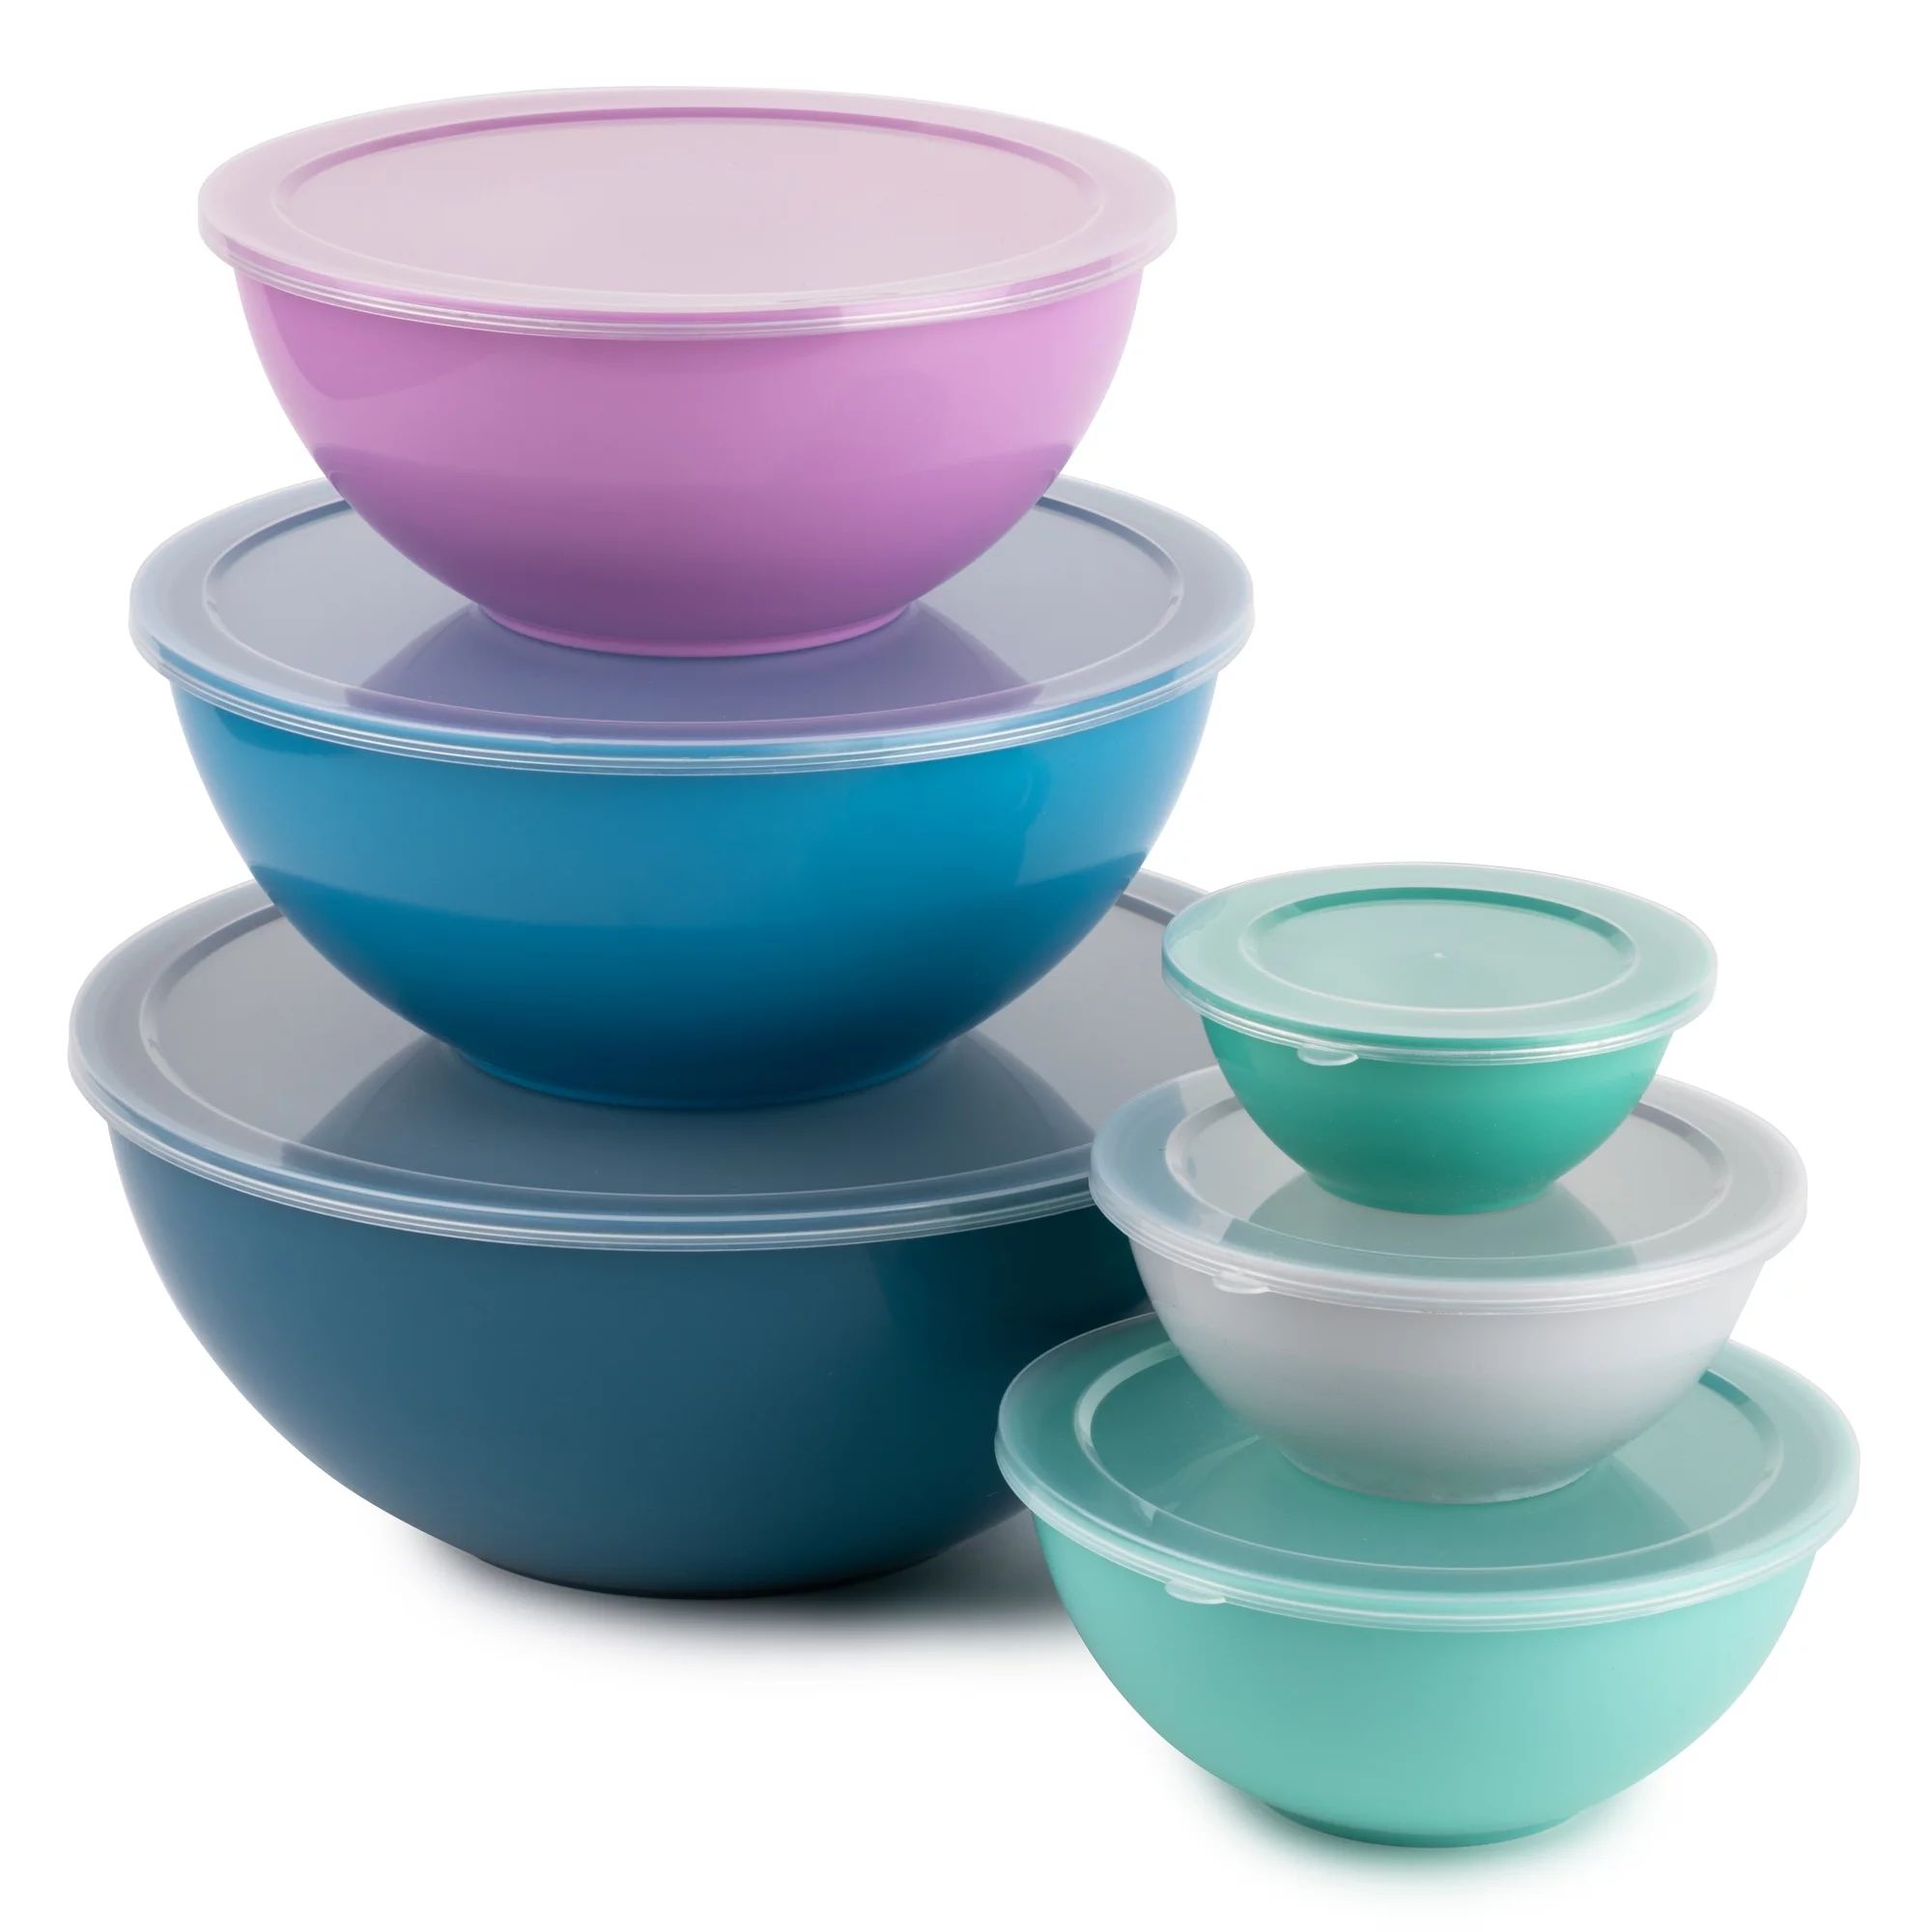 Thyme & Table Round Mixing Bowls, 12-Piece Set, Multi-Color | Walmart (US)